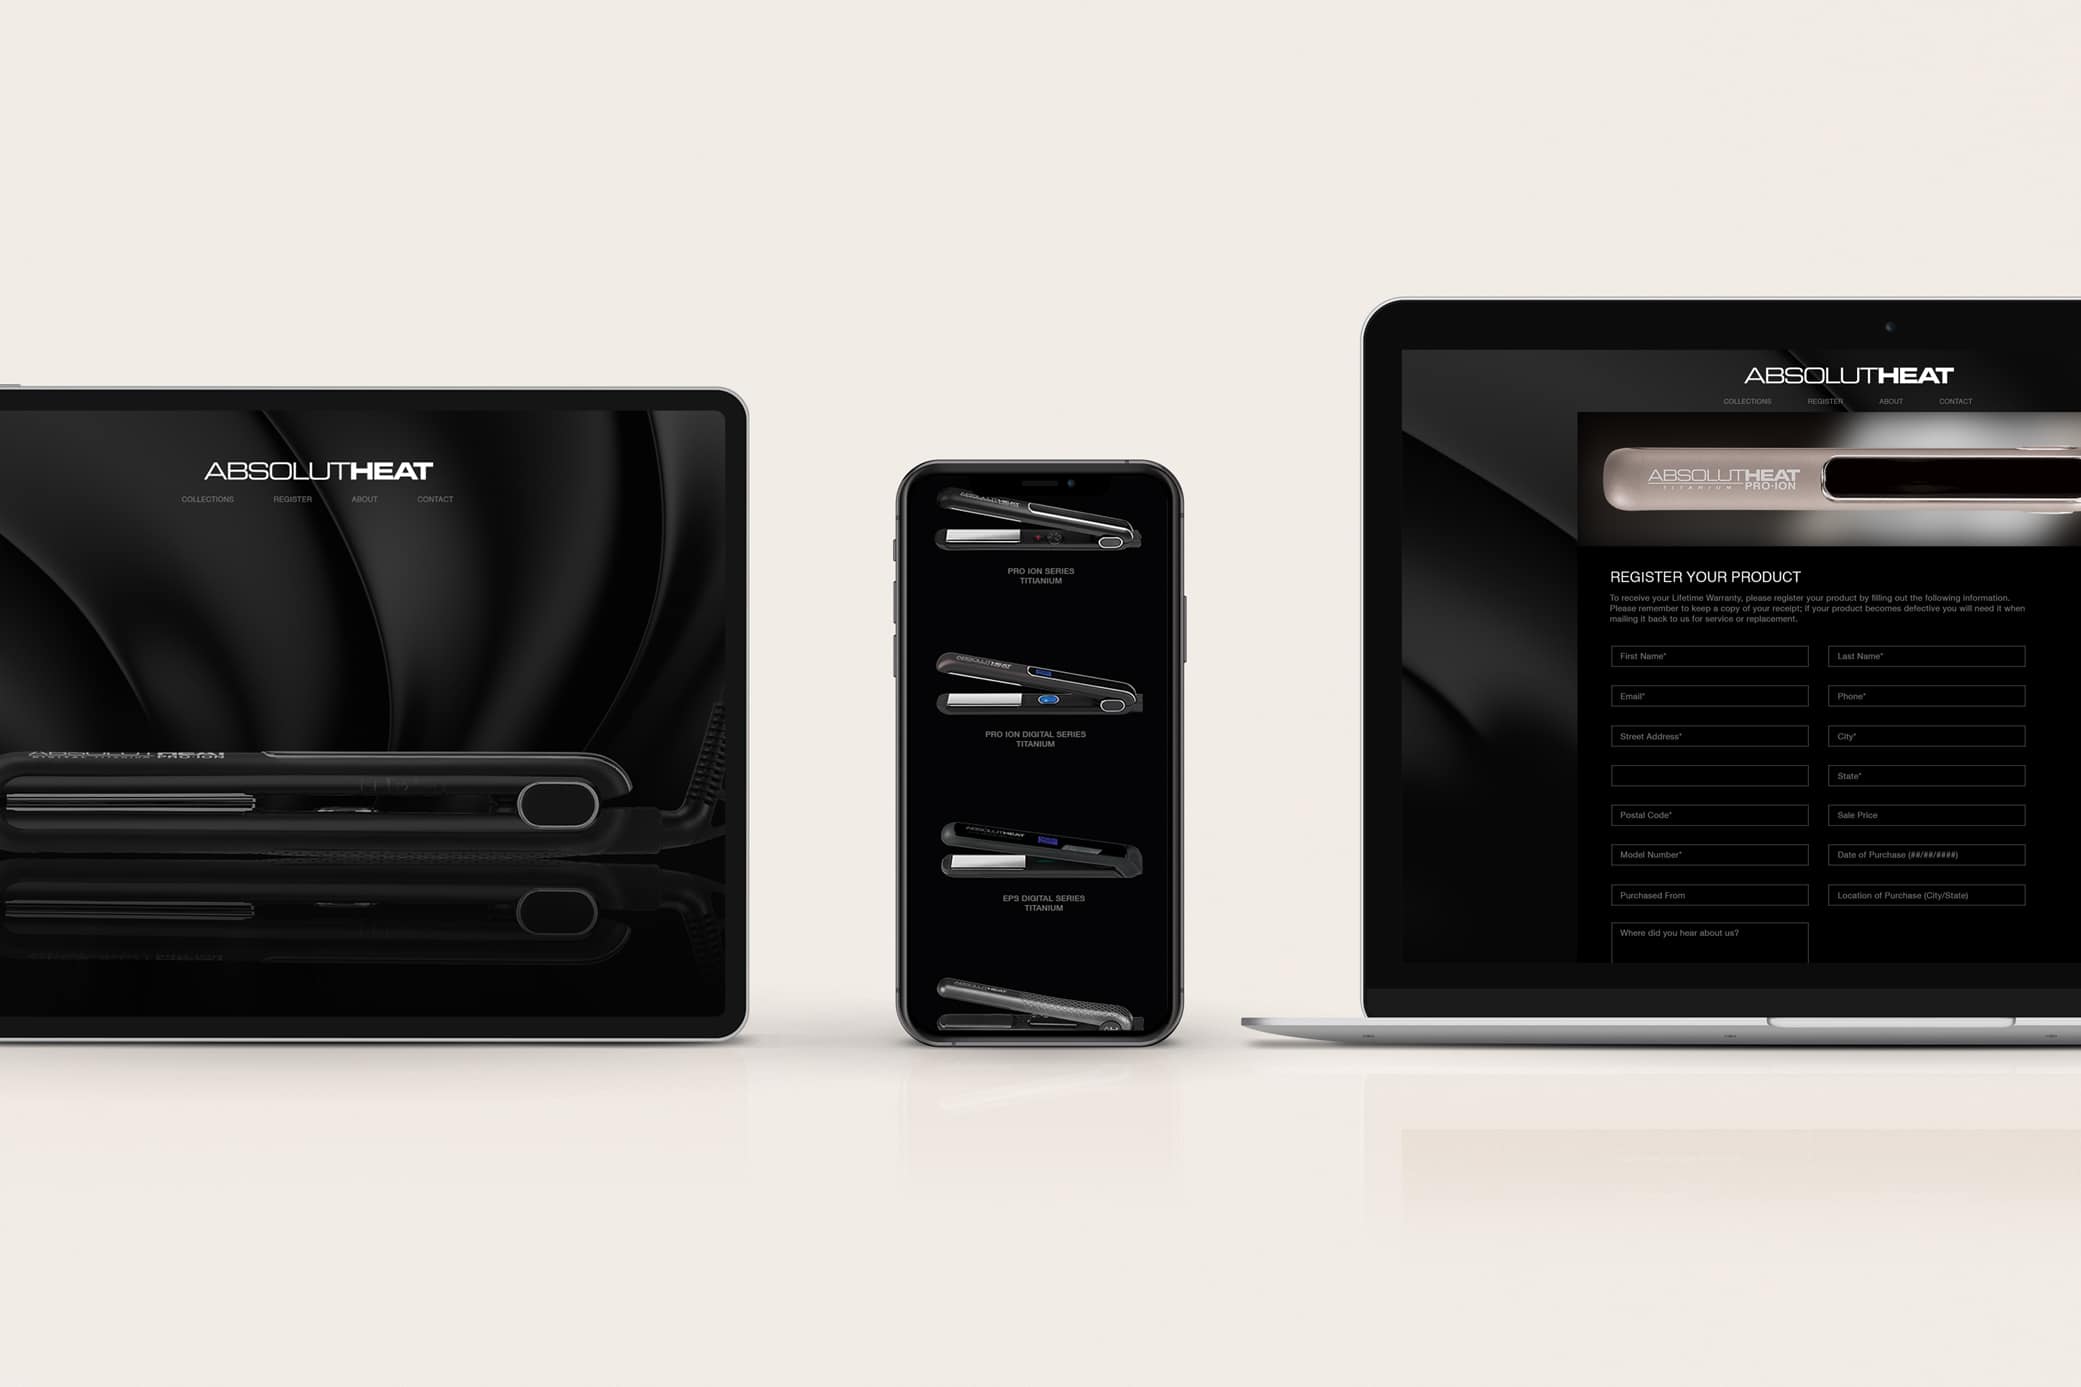 Beauty products web design, AbsolutHeat, showcasing its homepage in black with hero image and other pages featuring their flat iron tools.